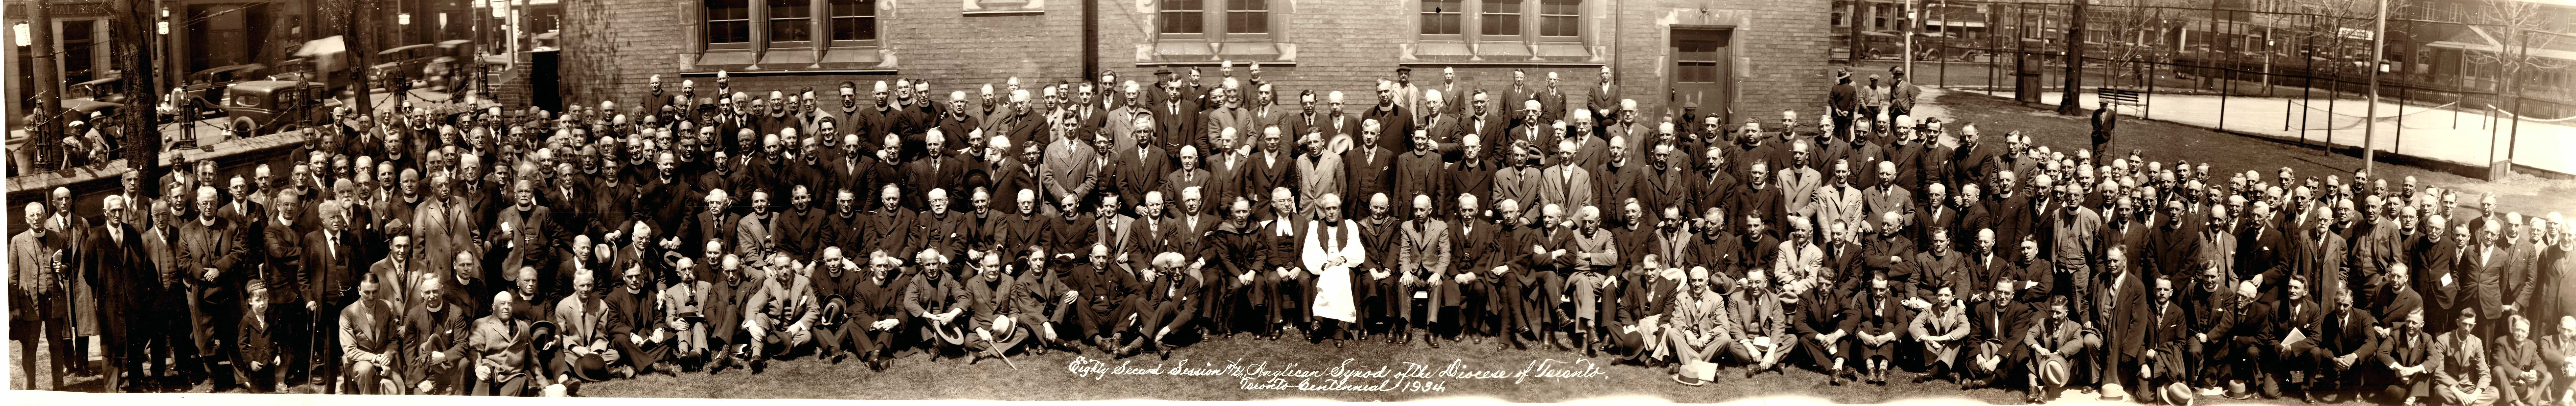 Photograph showing the members of Synod in 1934